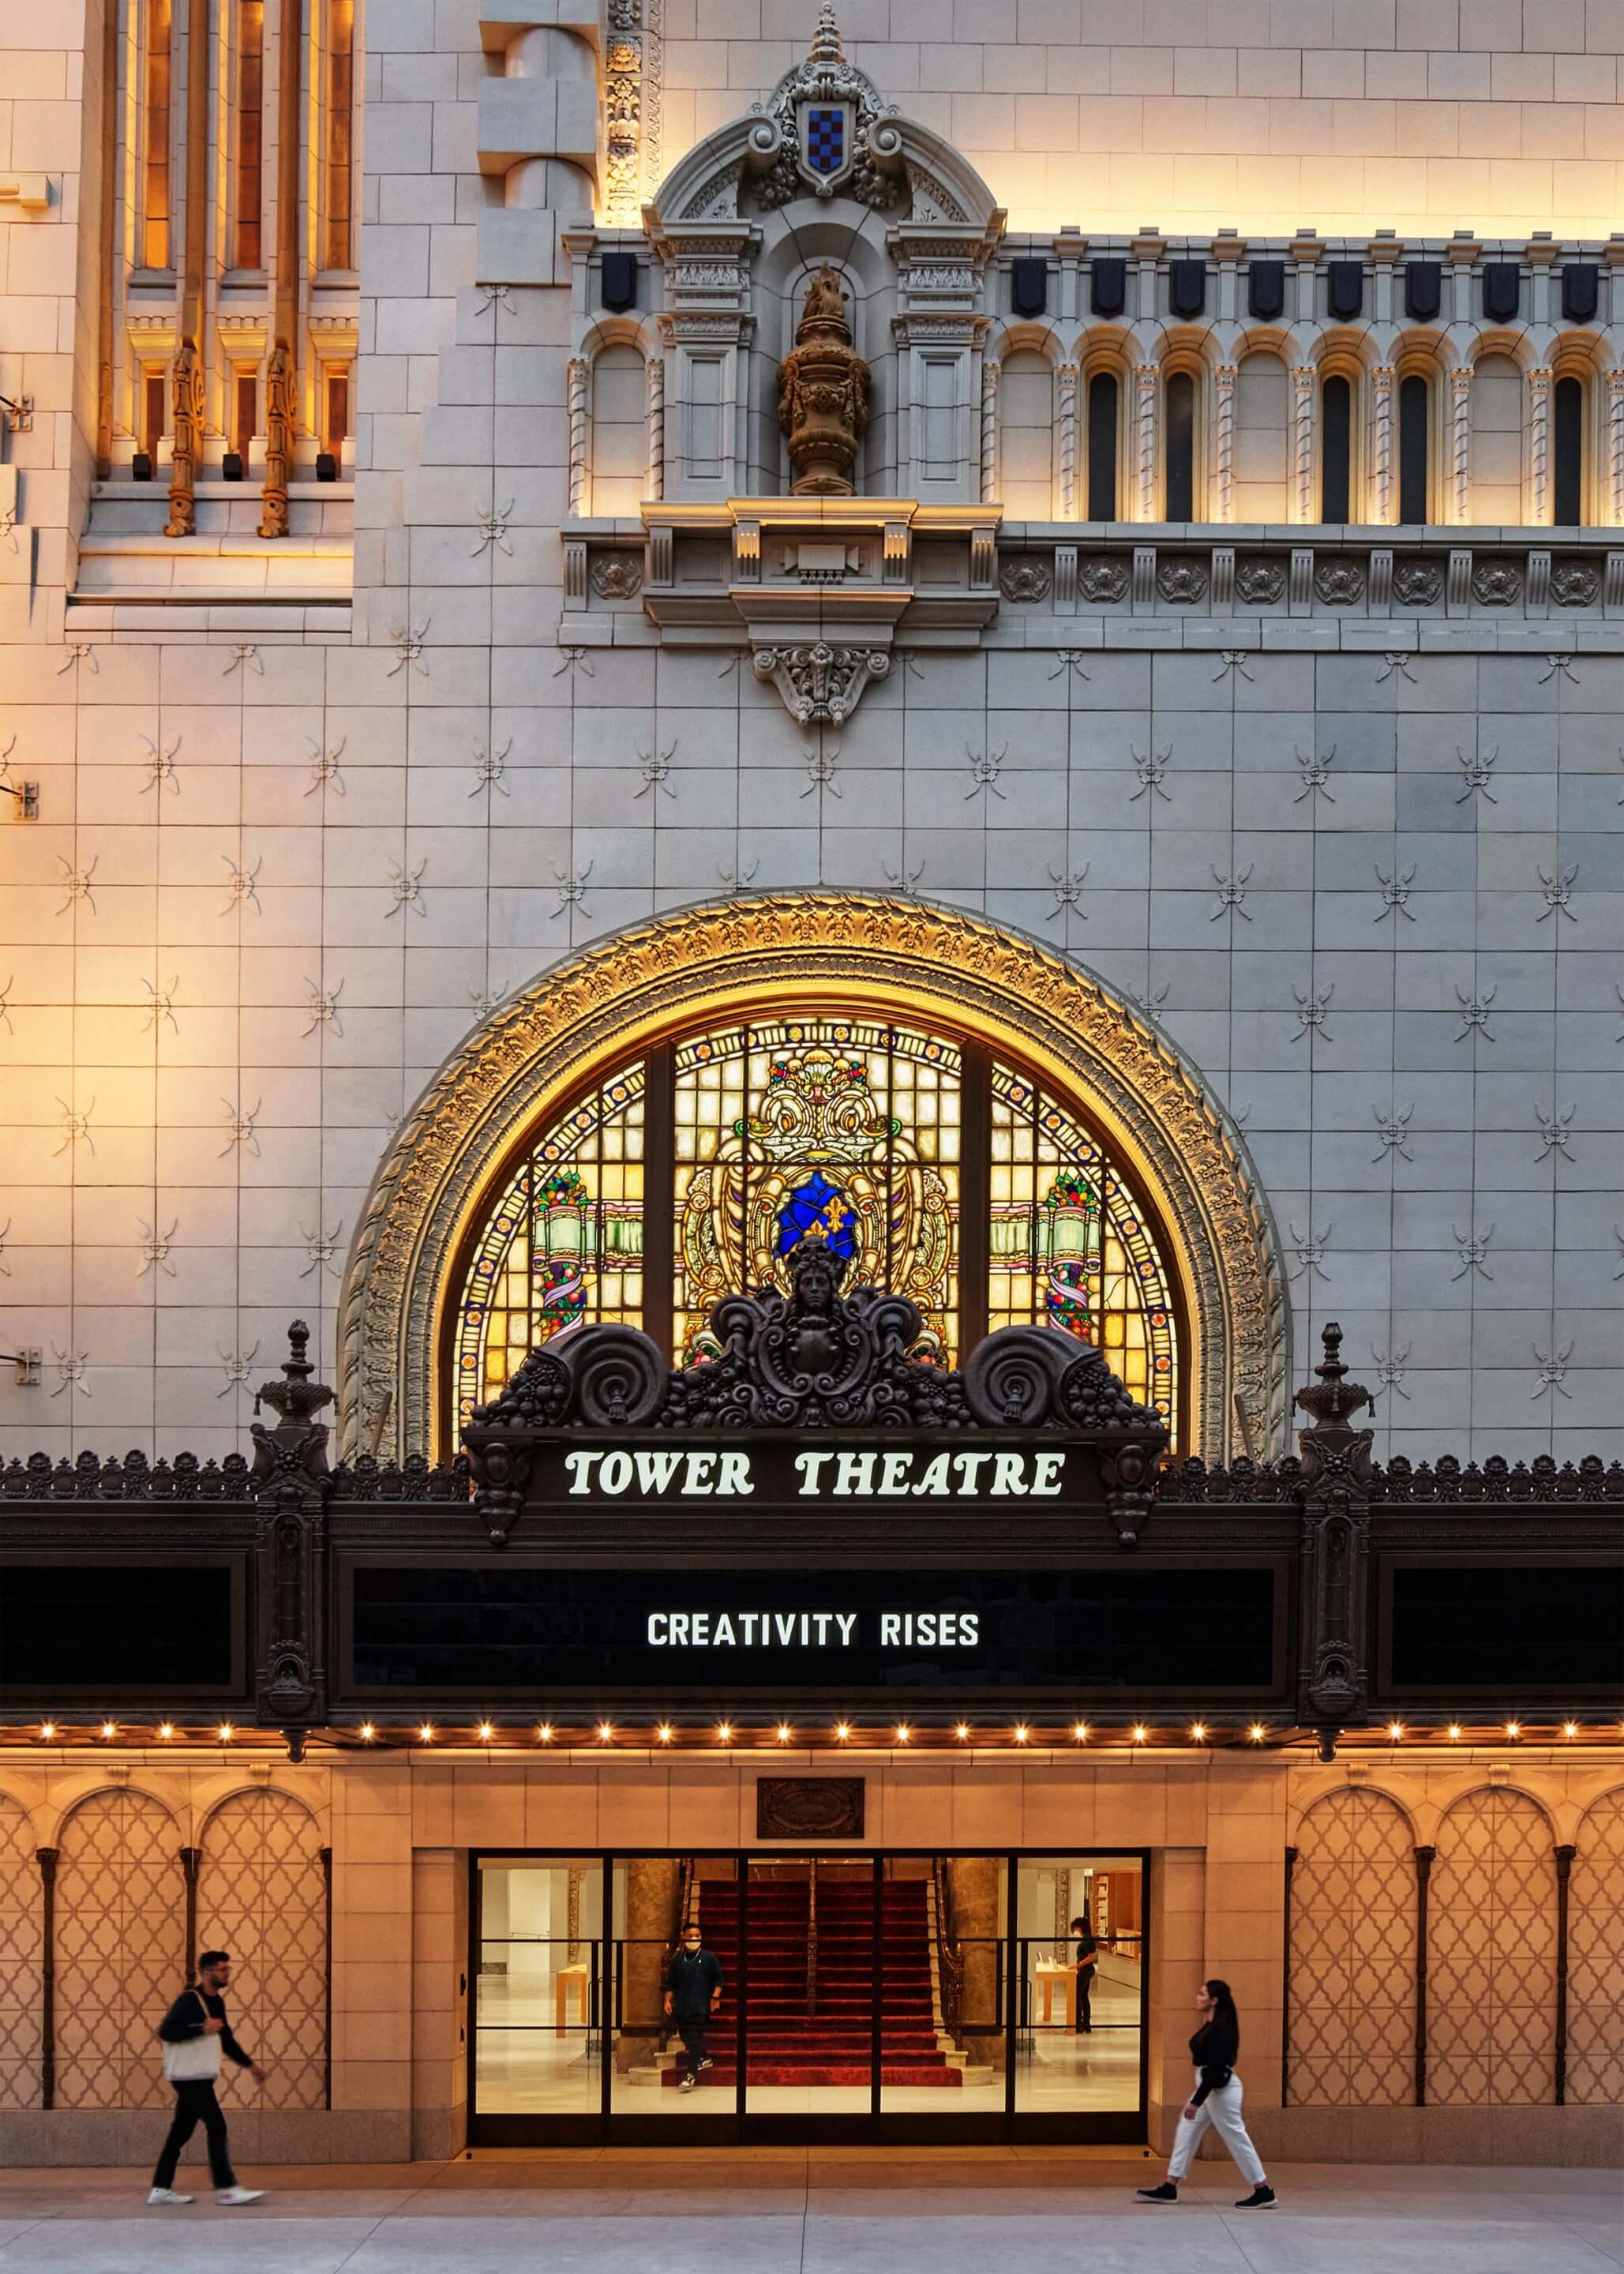 exterior view of a historic theater in downtown la, the Apple Tower Theatre